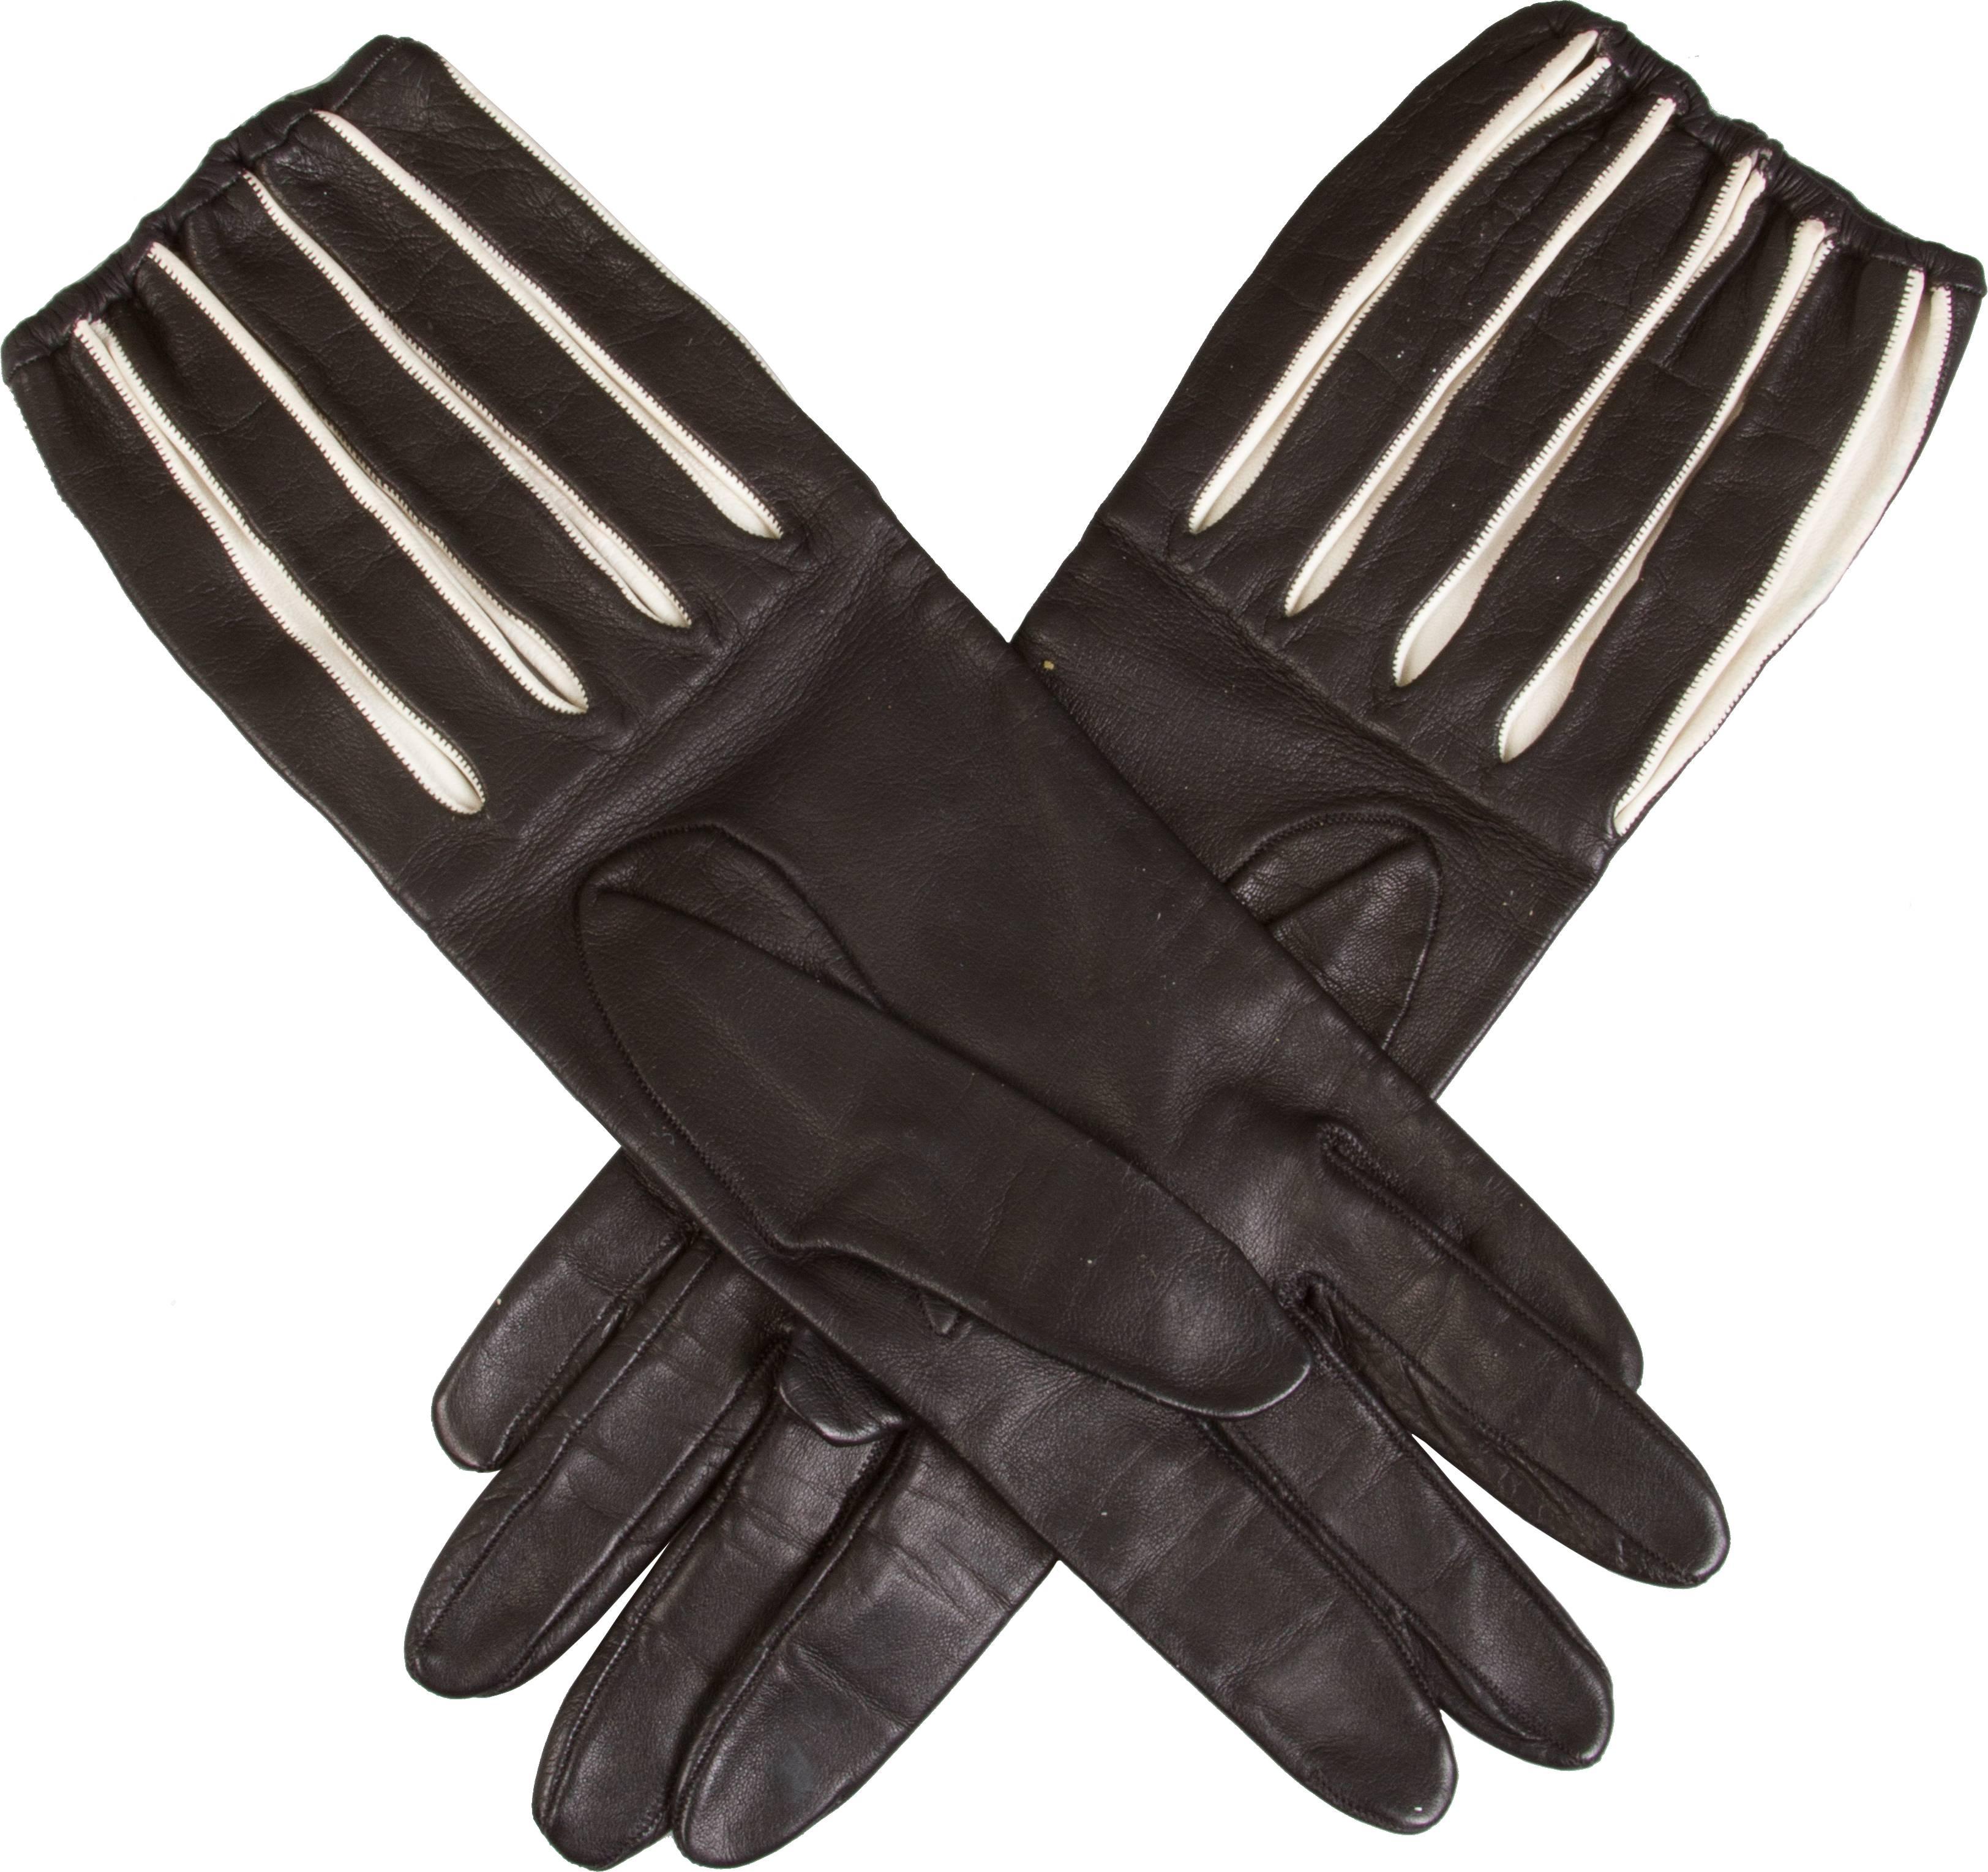 These are Tres Chic.

From the tip of the finger to the top of the glove is 11 inches. These Gloves are a size 6 1/2.